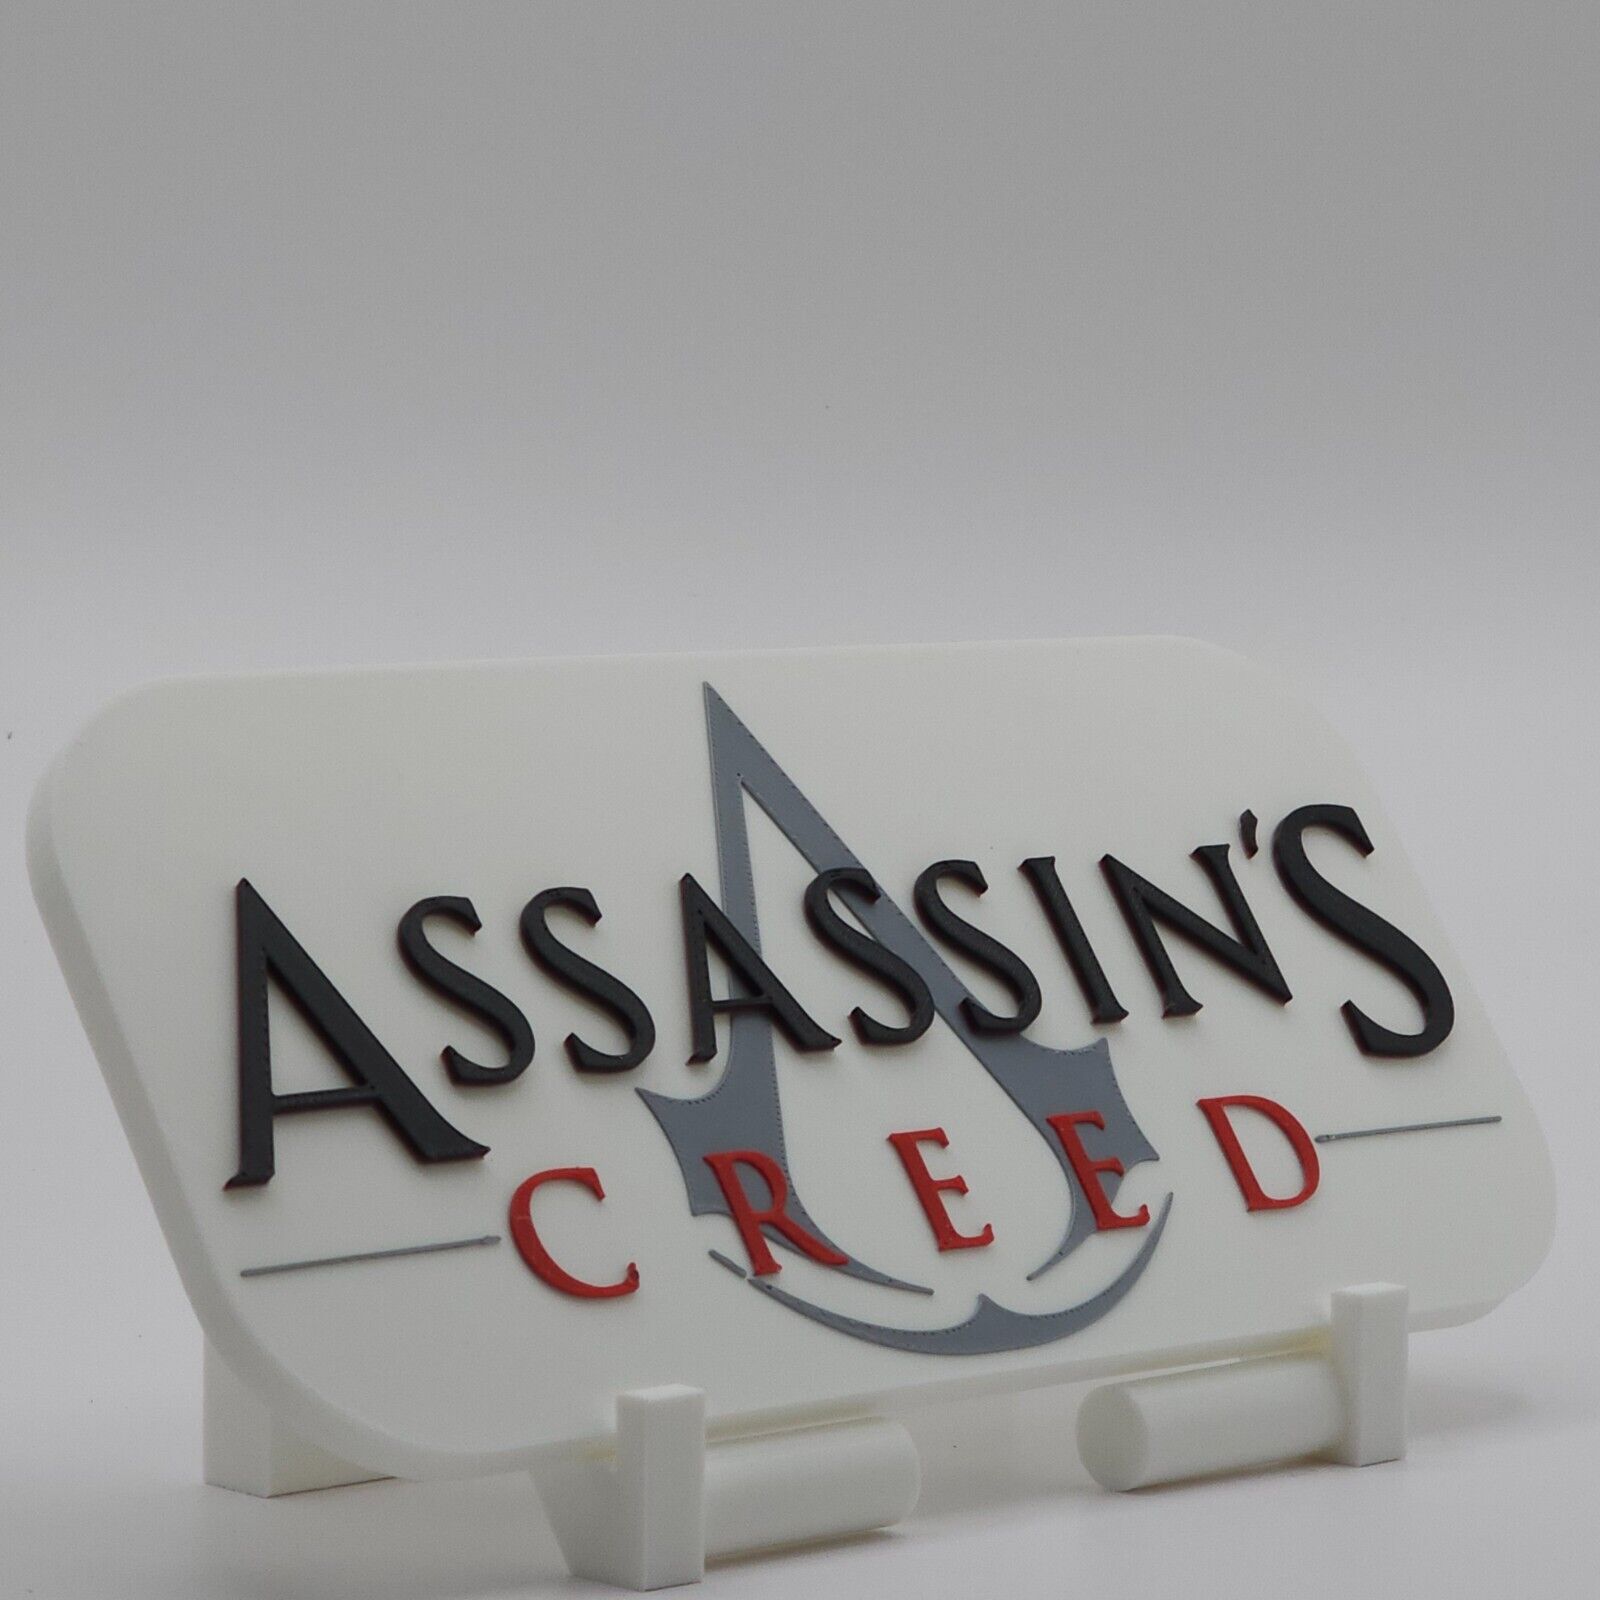 Assassin's Creed 3D Printed Wall Sign - Game Fan Art Decor